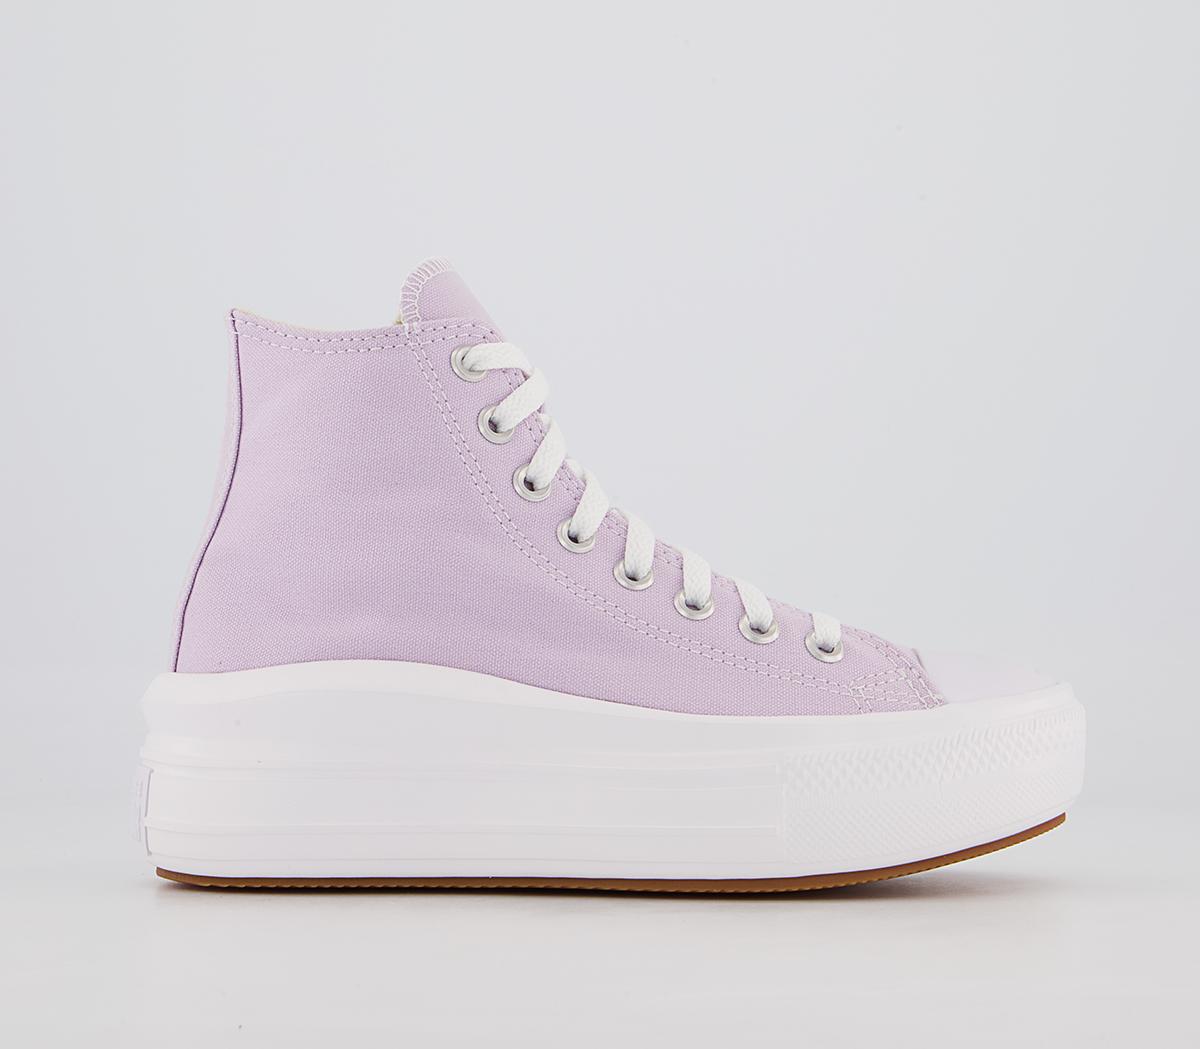 ConverseAll Star Move Platform TrainersPale Amethyst White White